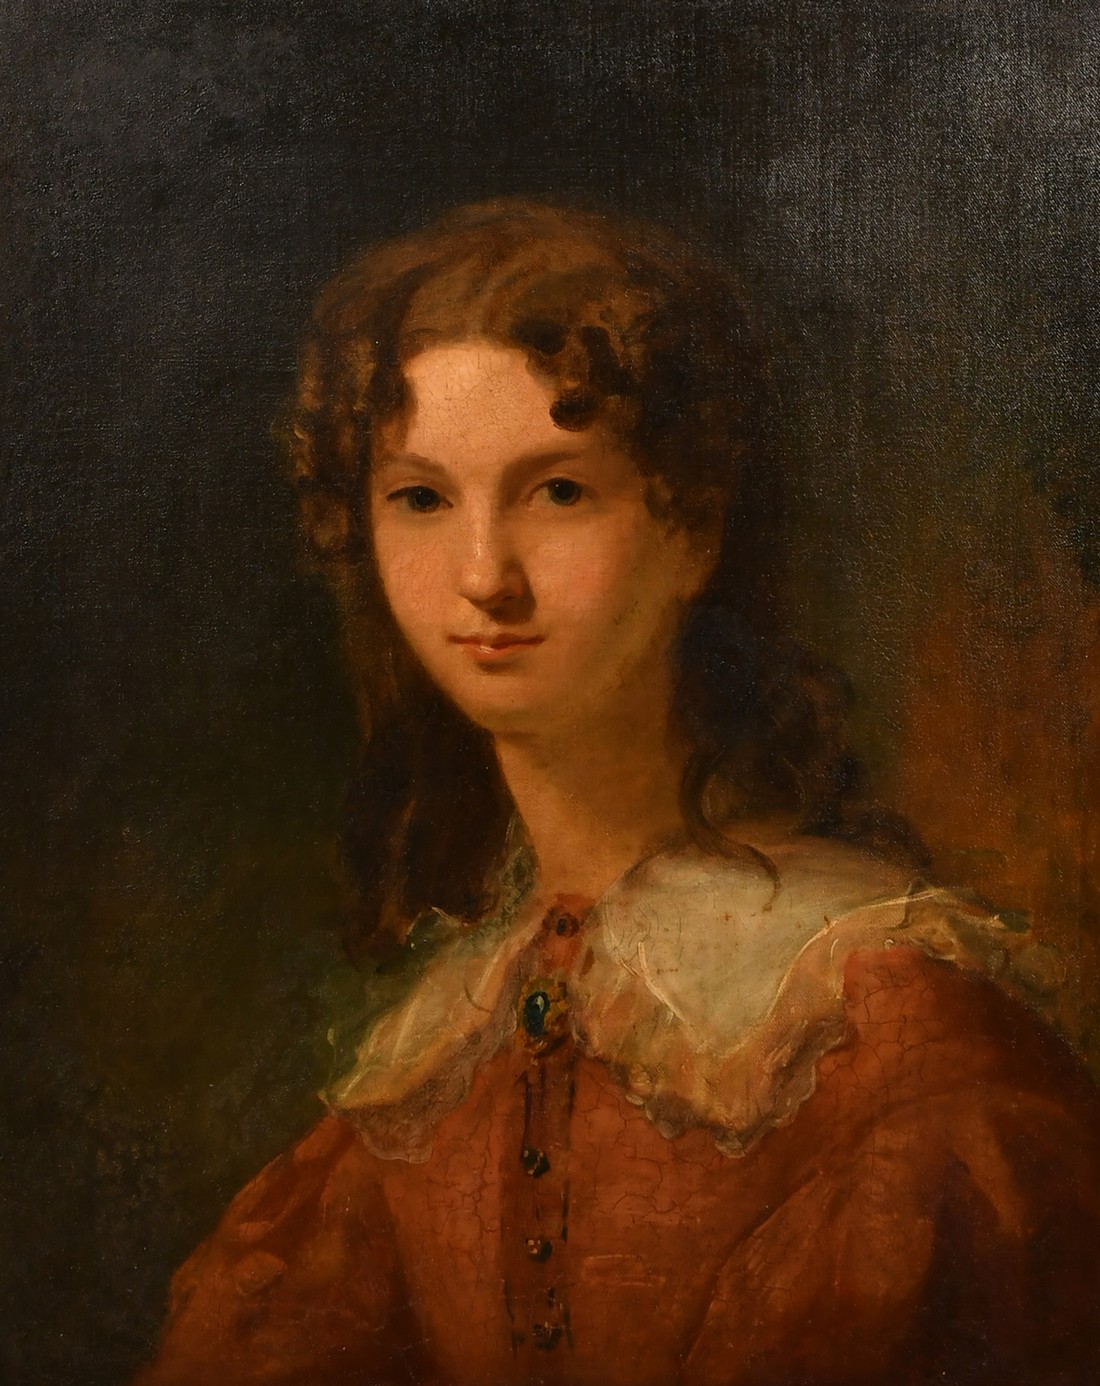 Colvin Smith (1795-1875), 'Mrs Bellingham', a portrait of a young lady, oil on canvas, 25" x 20" (